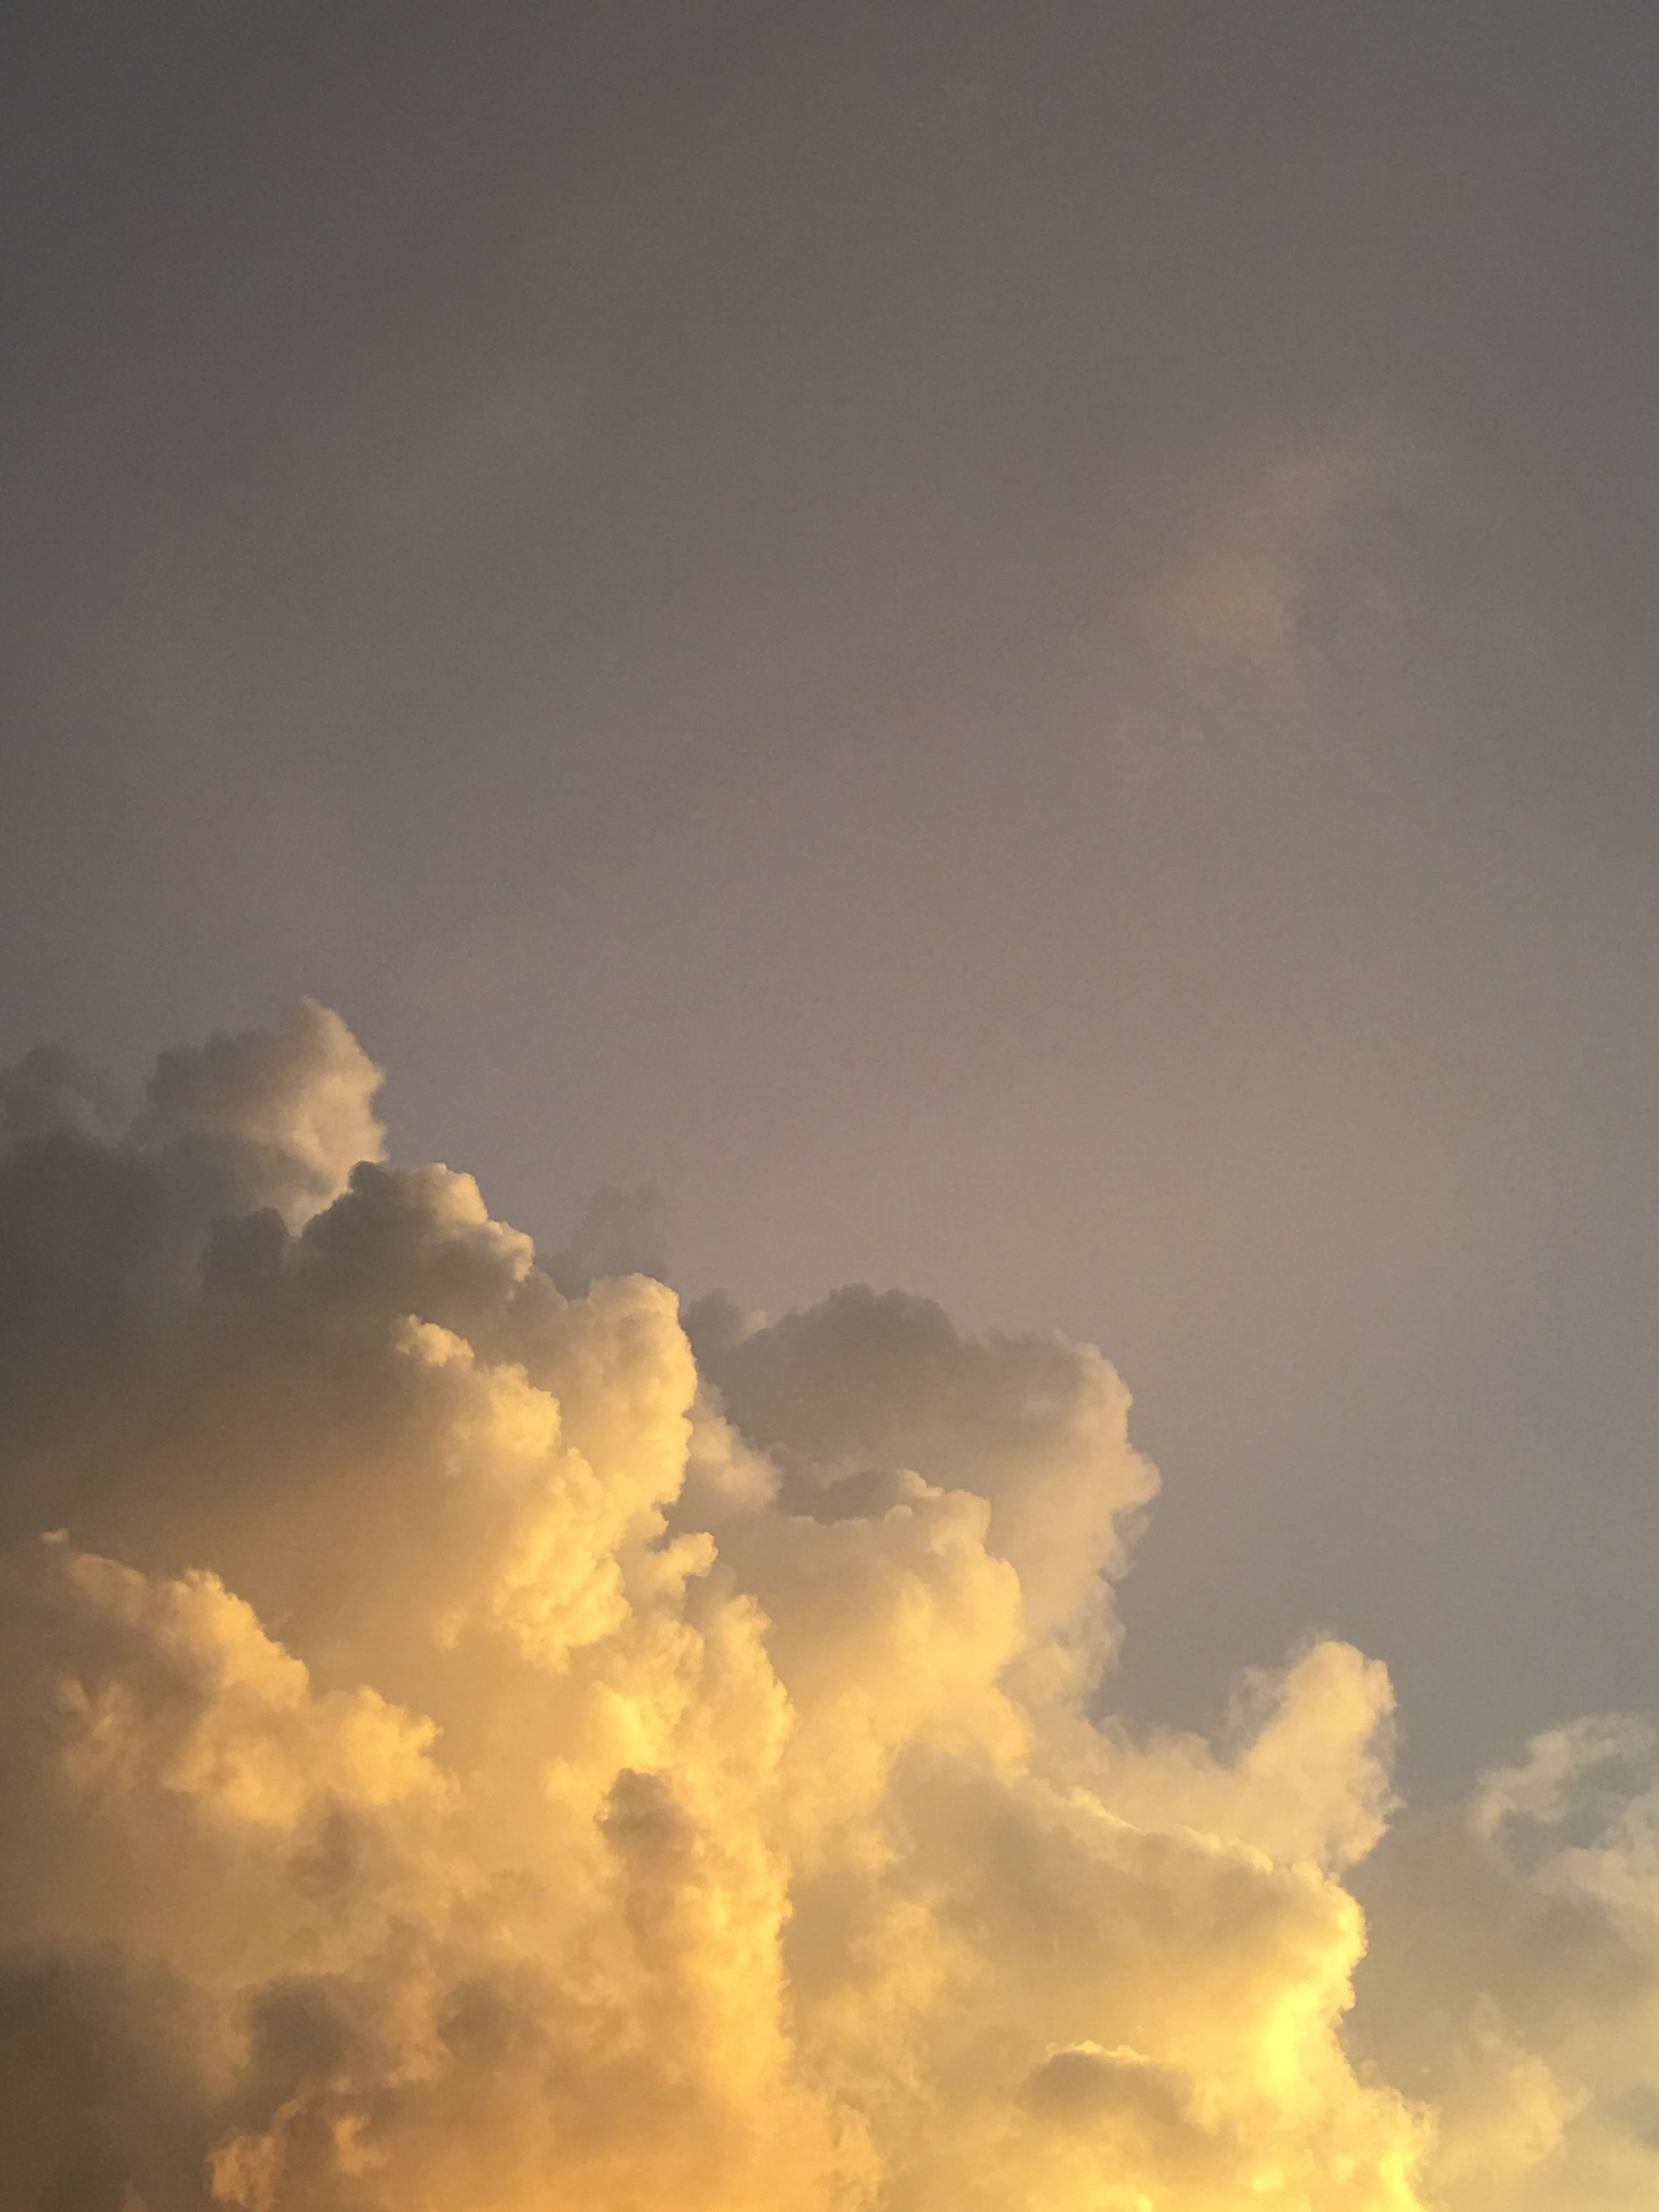 Yellow Cloud Iphone Wallpapers